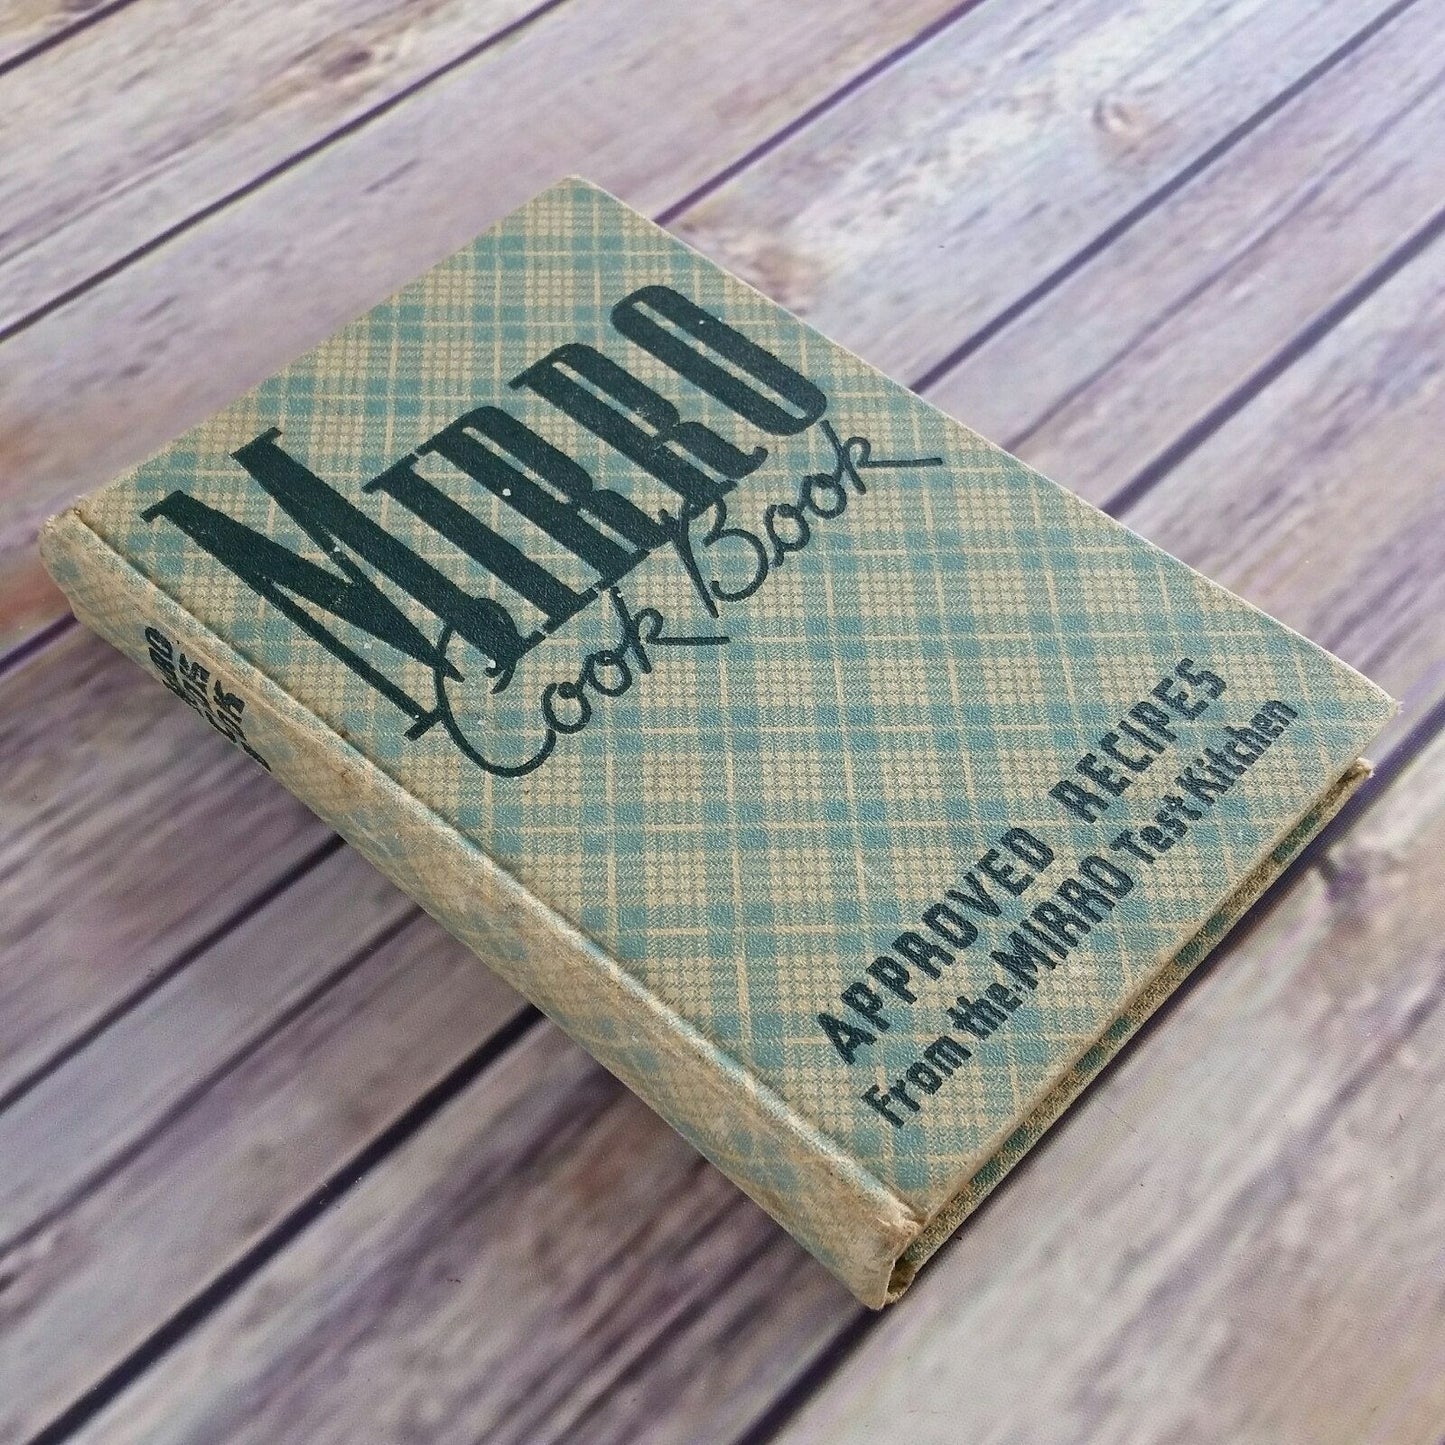 Vintage Cookbook Mirro Cook Book Approved Recipes Aluminum Goods Mfg Home Economics 1937 Hardcover Mirro Test Kitchen